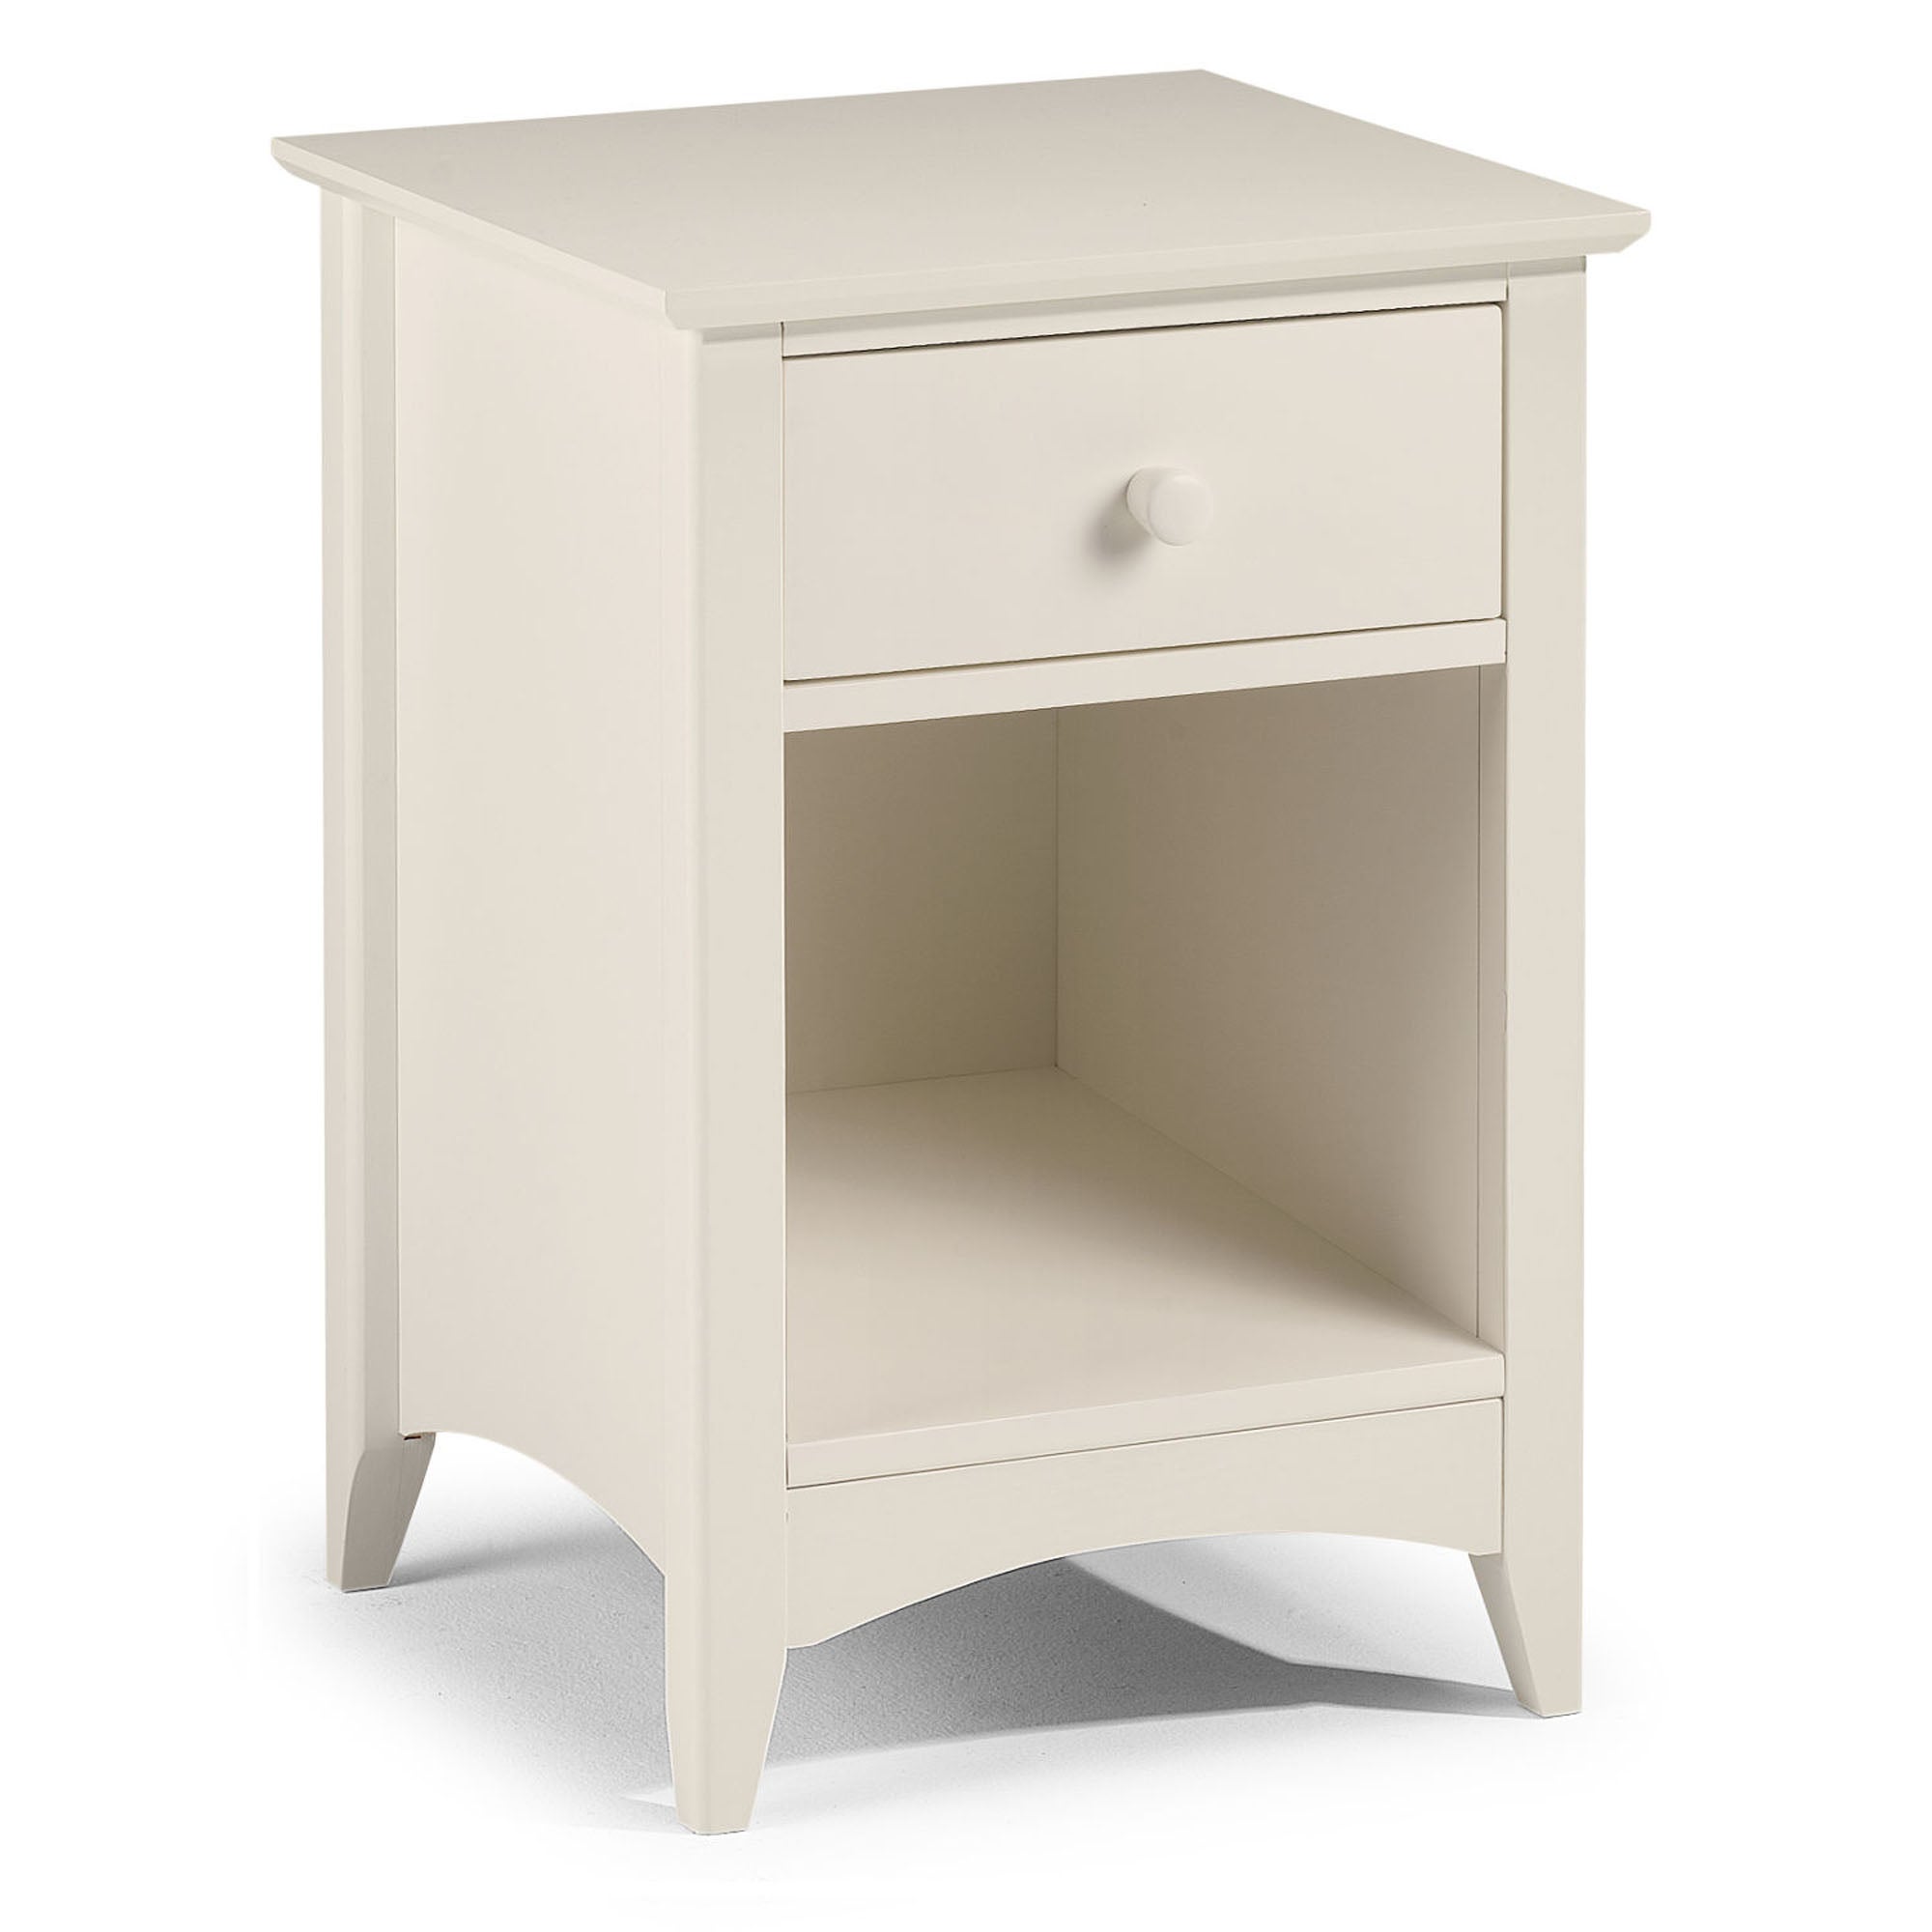 Cameo 1 Drawer Bedside Table, Stone White & Pine White